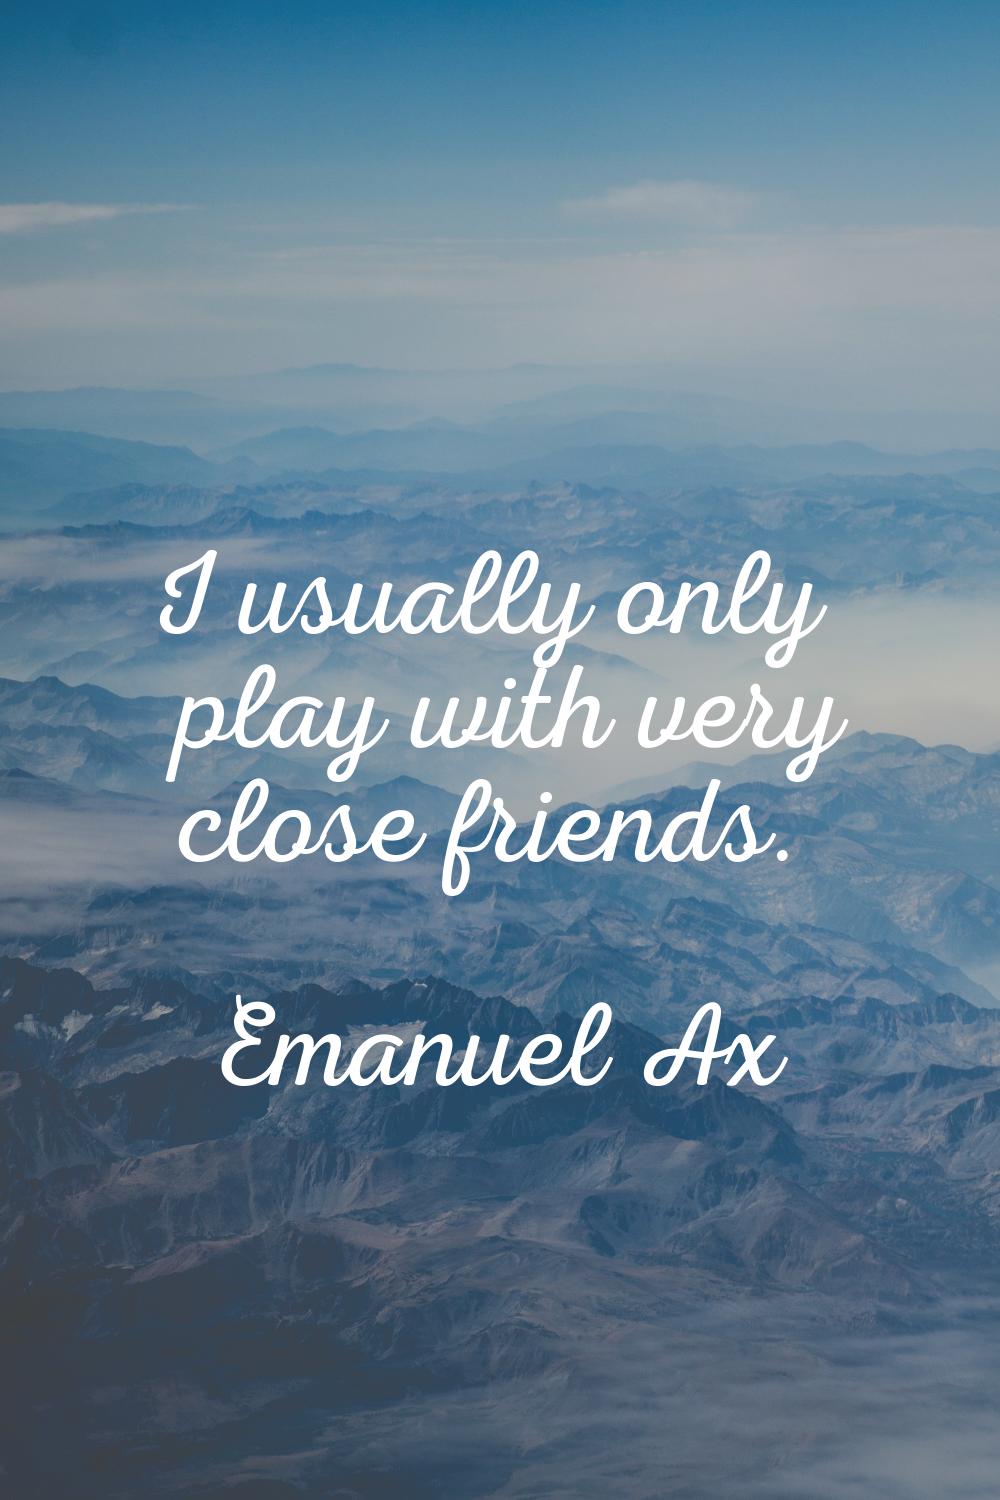 I usually only play with very close friends.